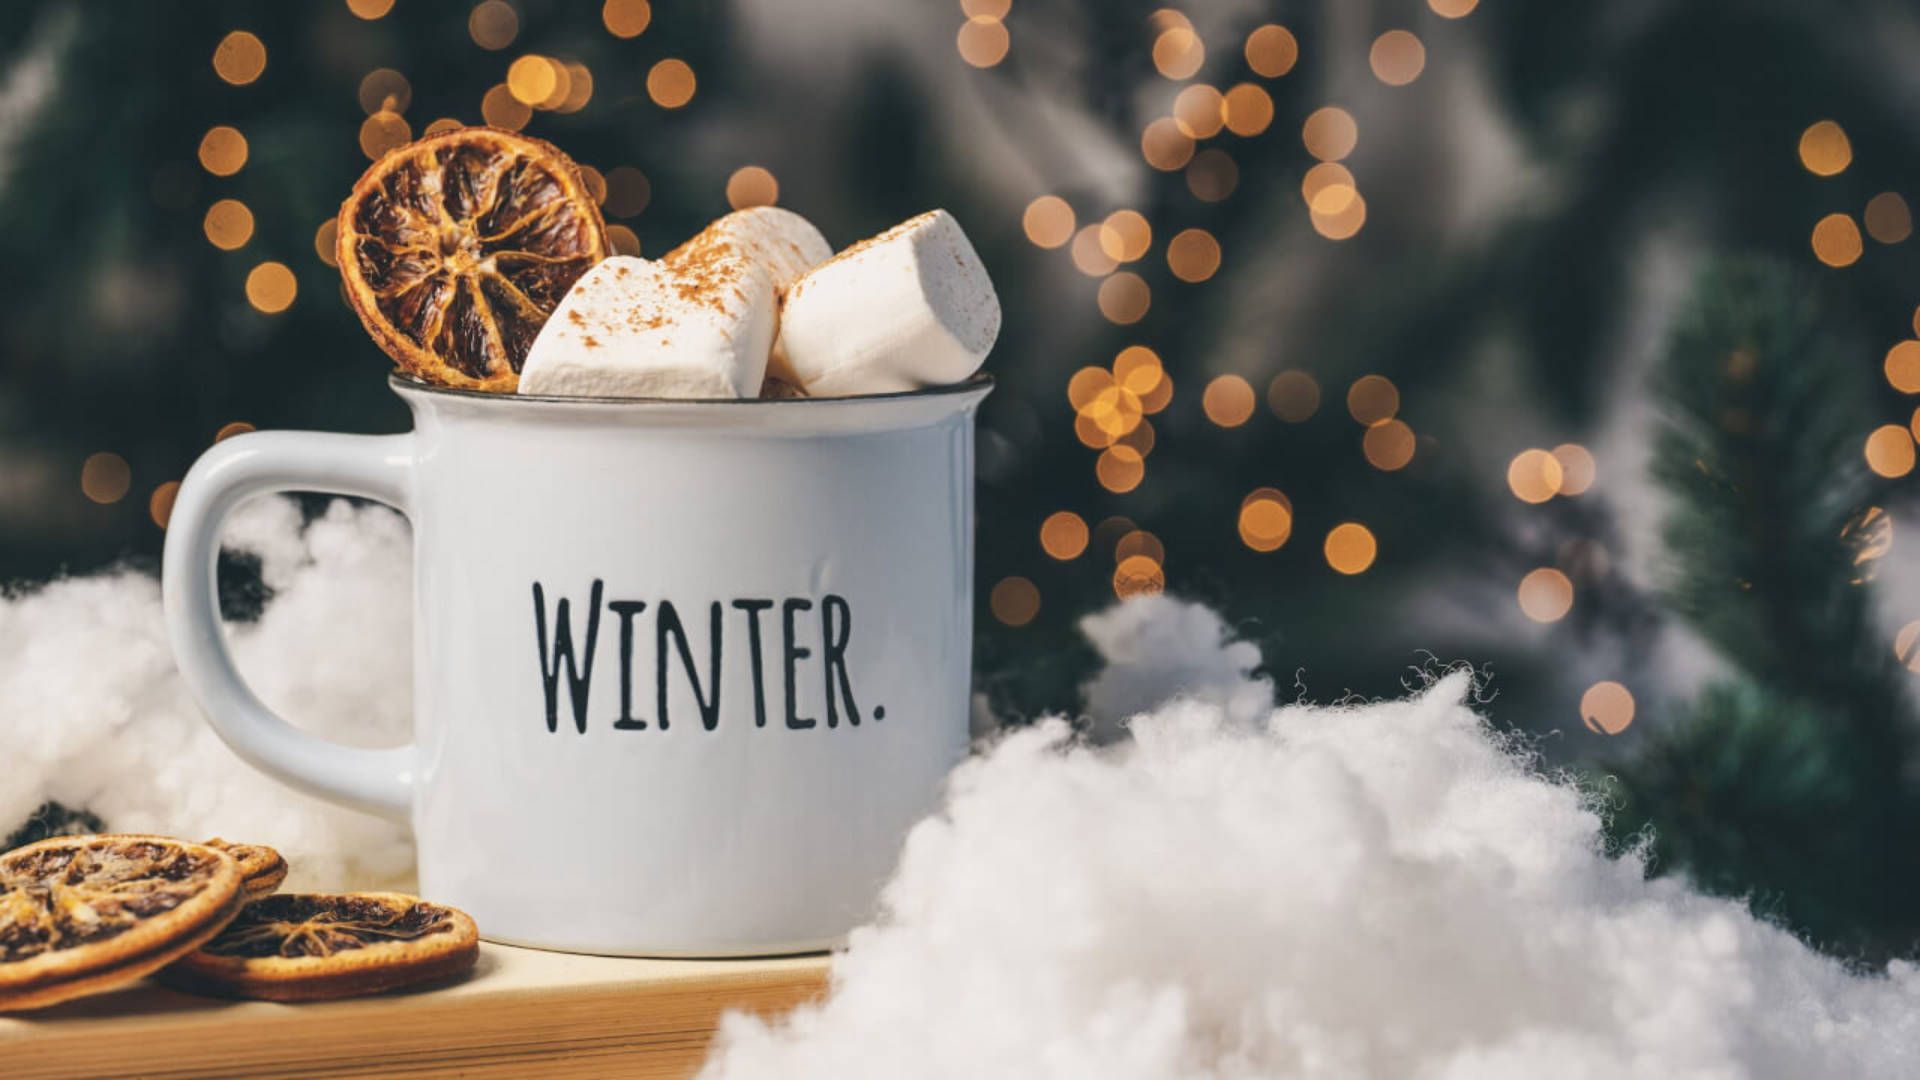 A mug with marshmallows and oranges on top of snow - Winter, cozy